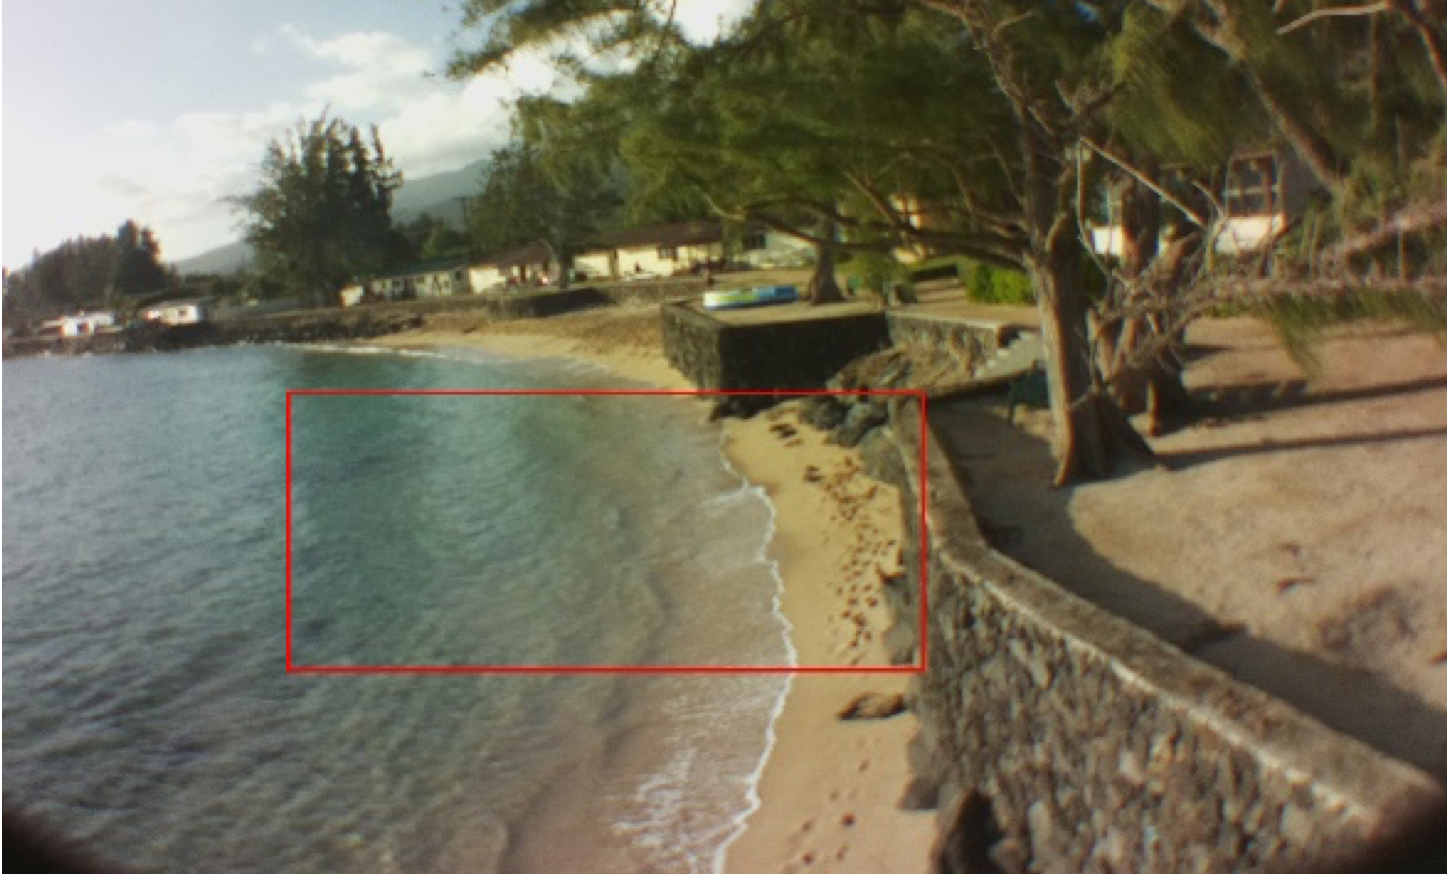 iBeach allows users to select areas of beach to analyze